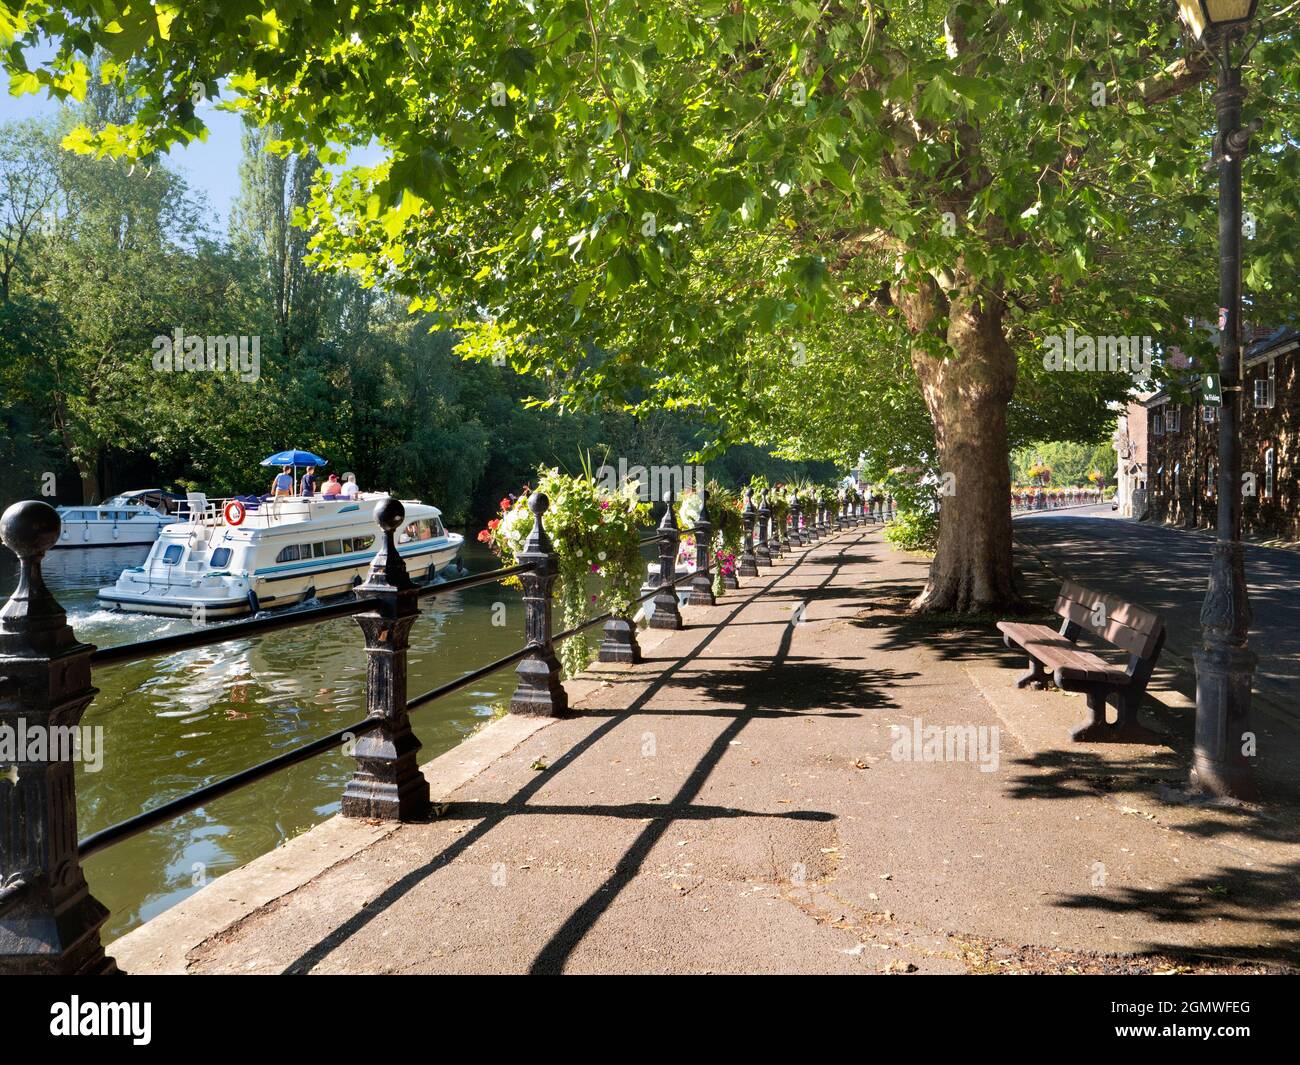 Abingdon, England - 27 August 2019; four persons in view.    Saint Helen's Wharf is a noted beauty spot on the River Thames, just upstream of the medi Stock Photo